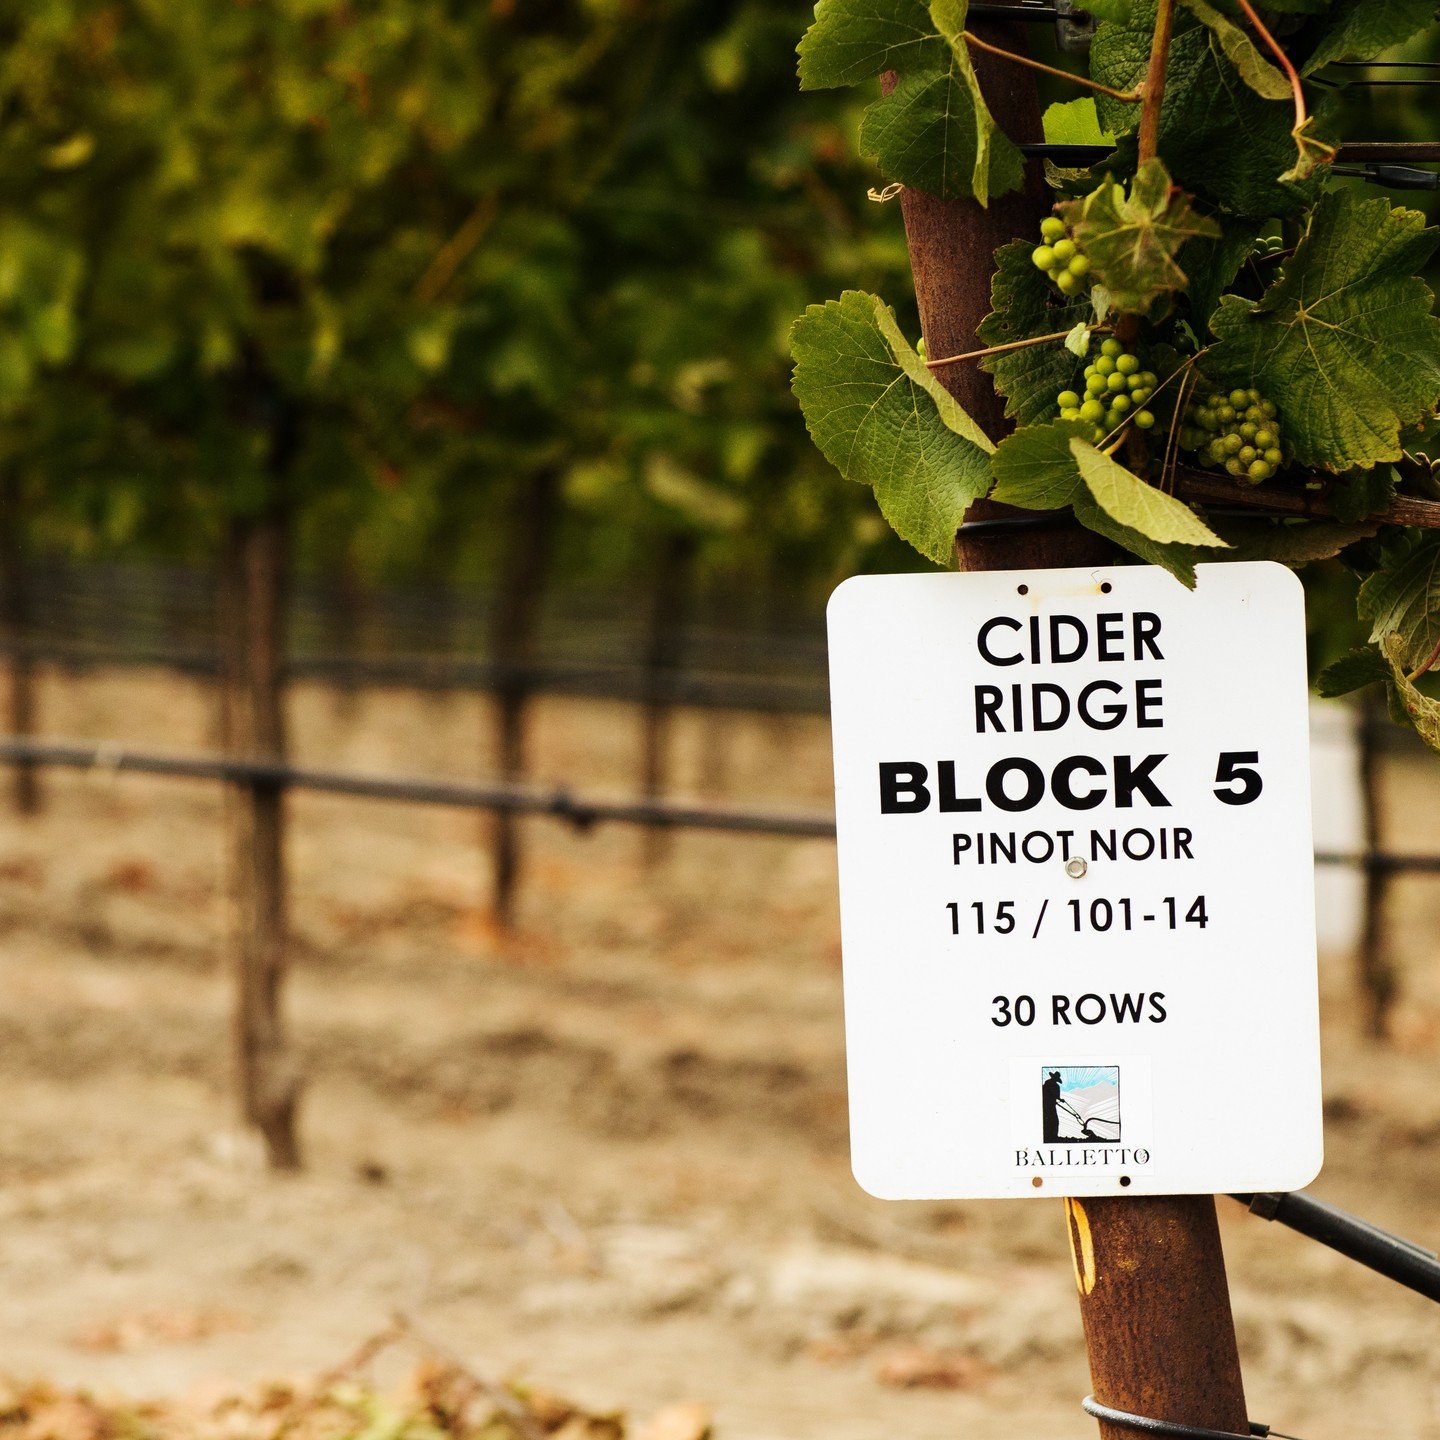 Cider Ridge Vineyard, home to the vines that create some of our most spectacular wines!

This vineyard predominantly grows two varietals: Chardonnay and Pinot Noir. Cider Ridge's Chardonnay is lauded for its elegant balance and intensity, offering an